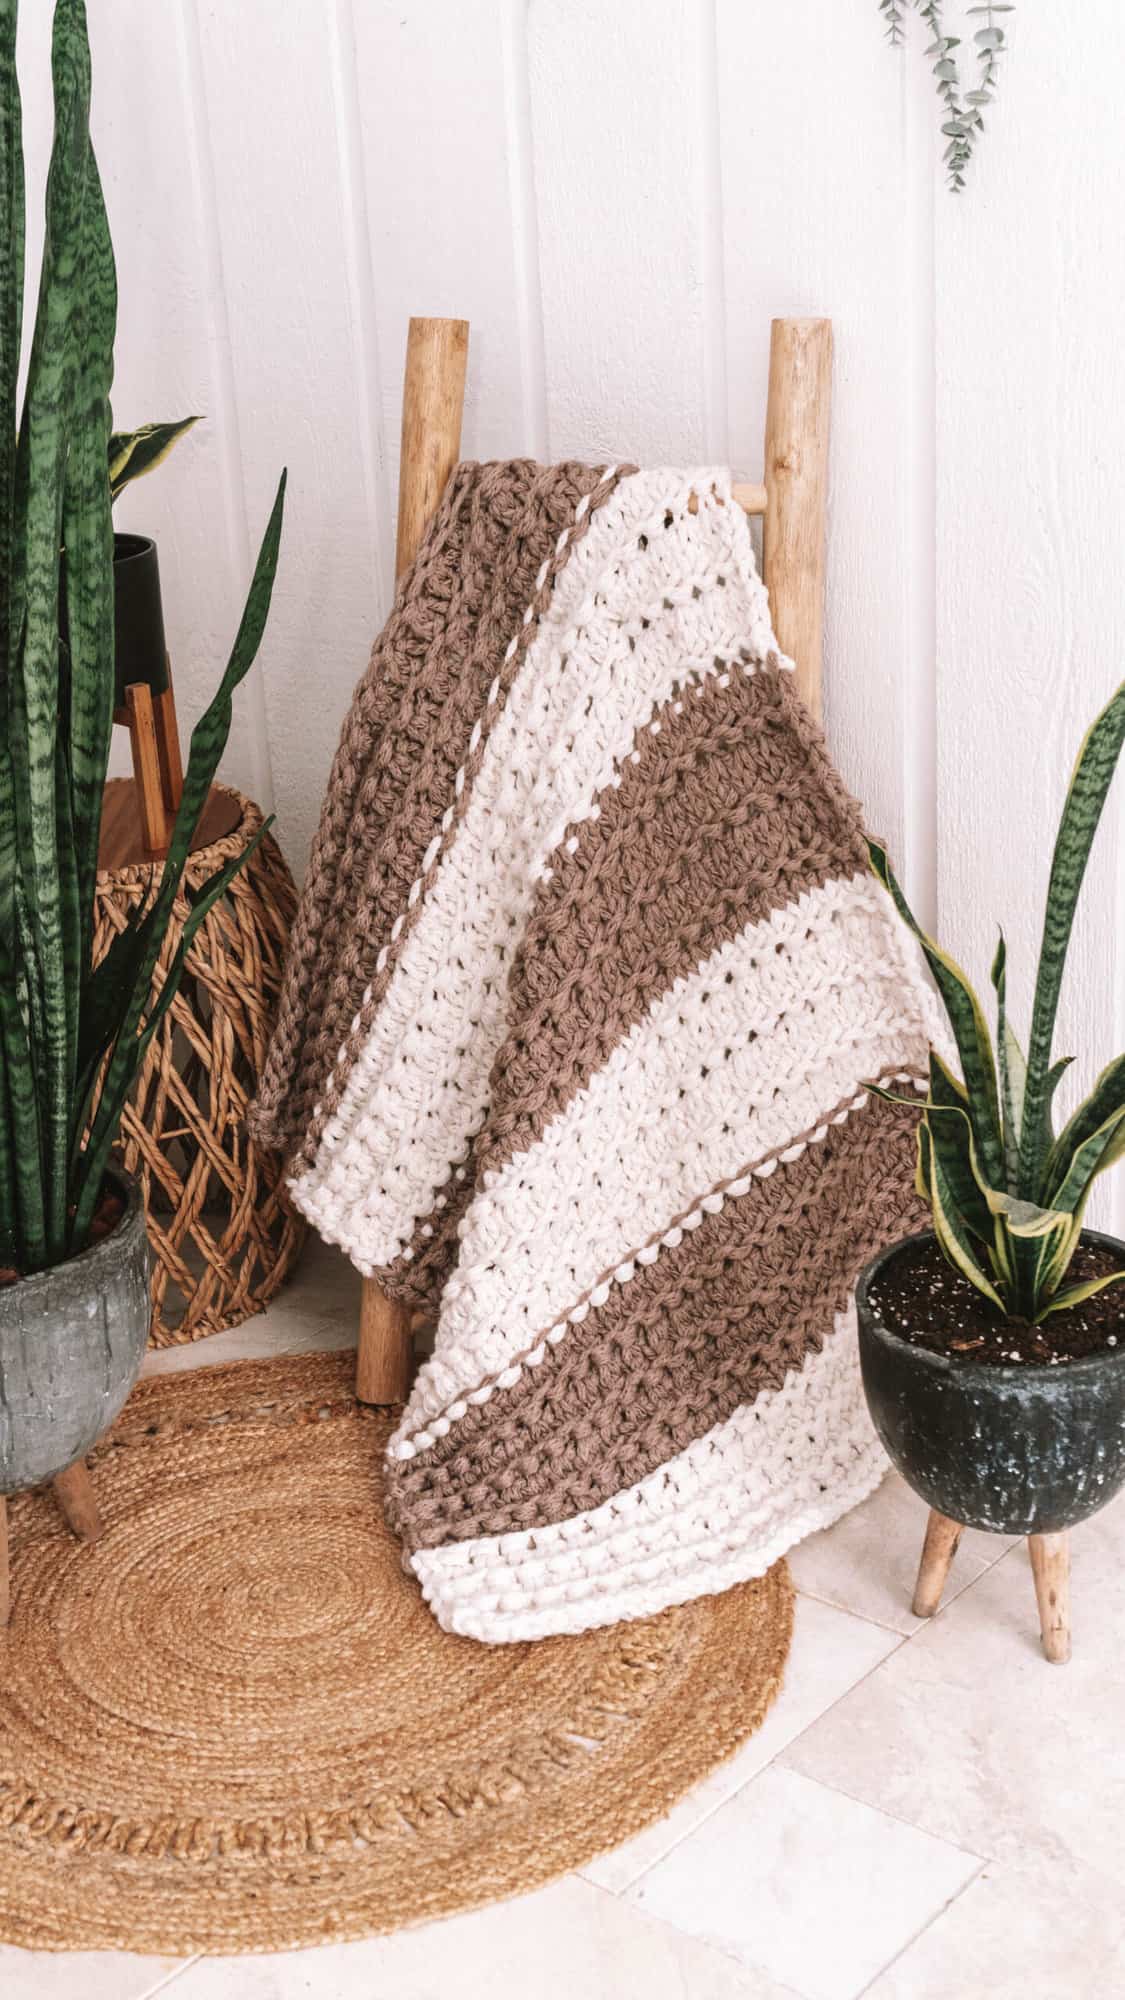 textured knit blanket pattern in brown and white yarn